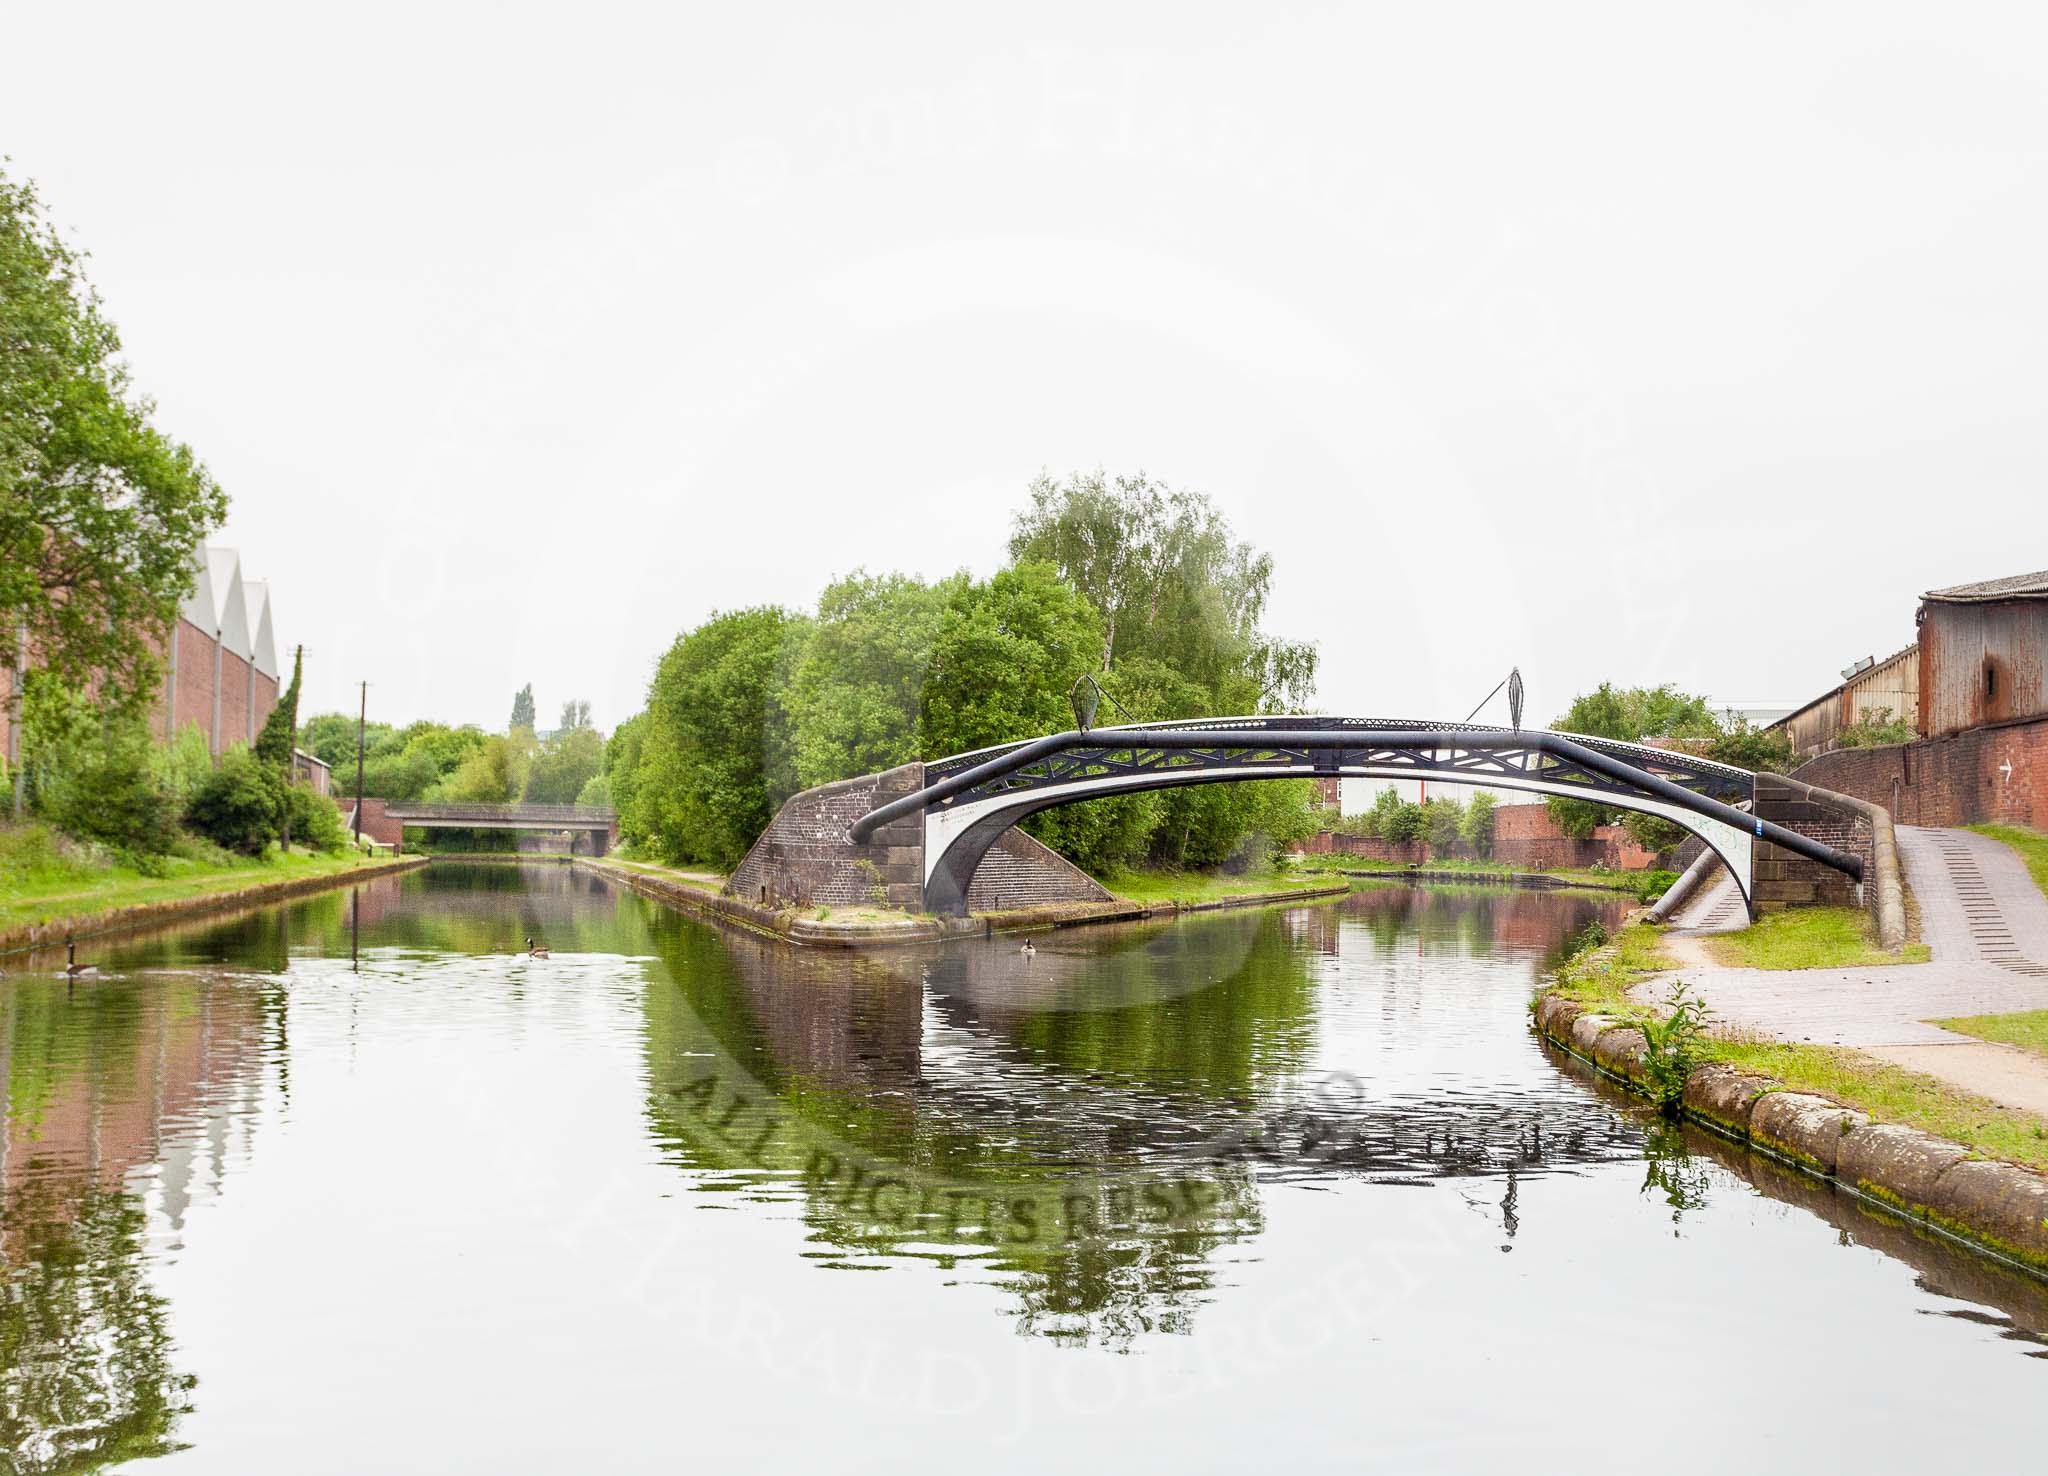 BCN 24h Marathon Challenge 2015: Smethwick Junction seen from the BCN New Main Line, with the Old Main Line on the right.
Birmingham Canal Navigations,



on 23 May 2015 at 10:07, image #56